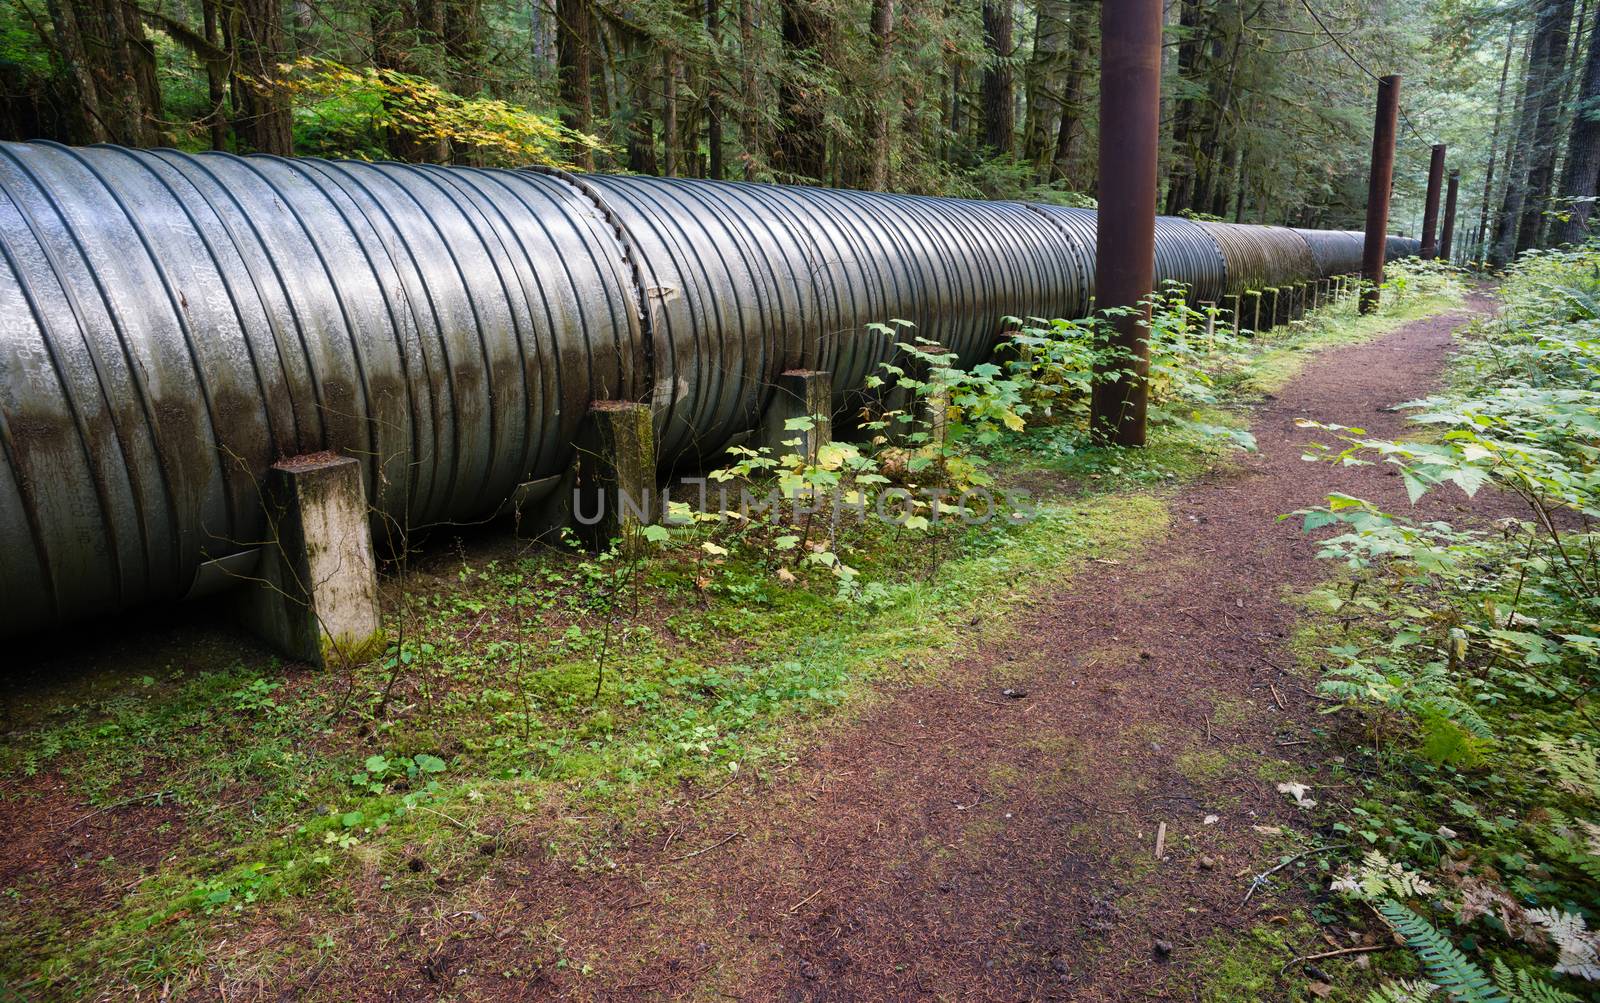 A pipeline carries water to the generator room for electricity